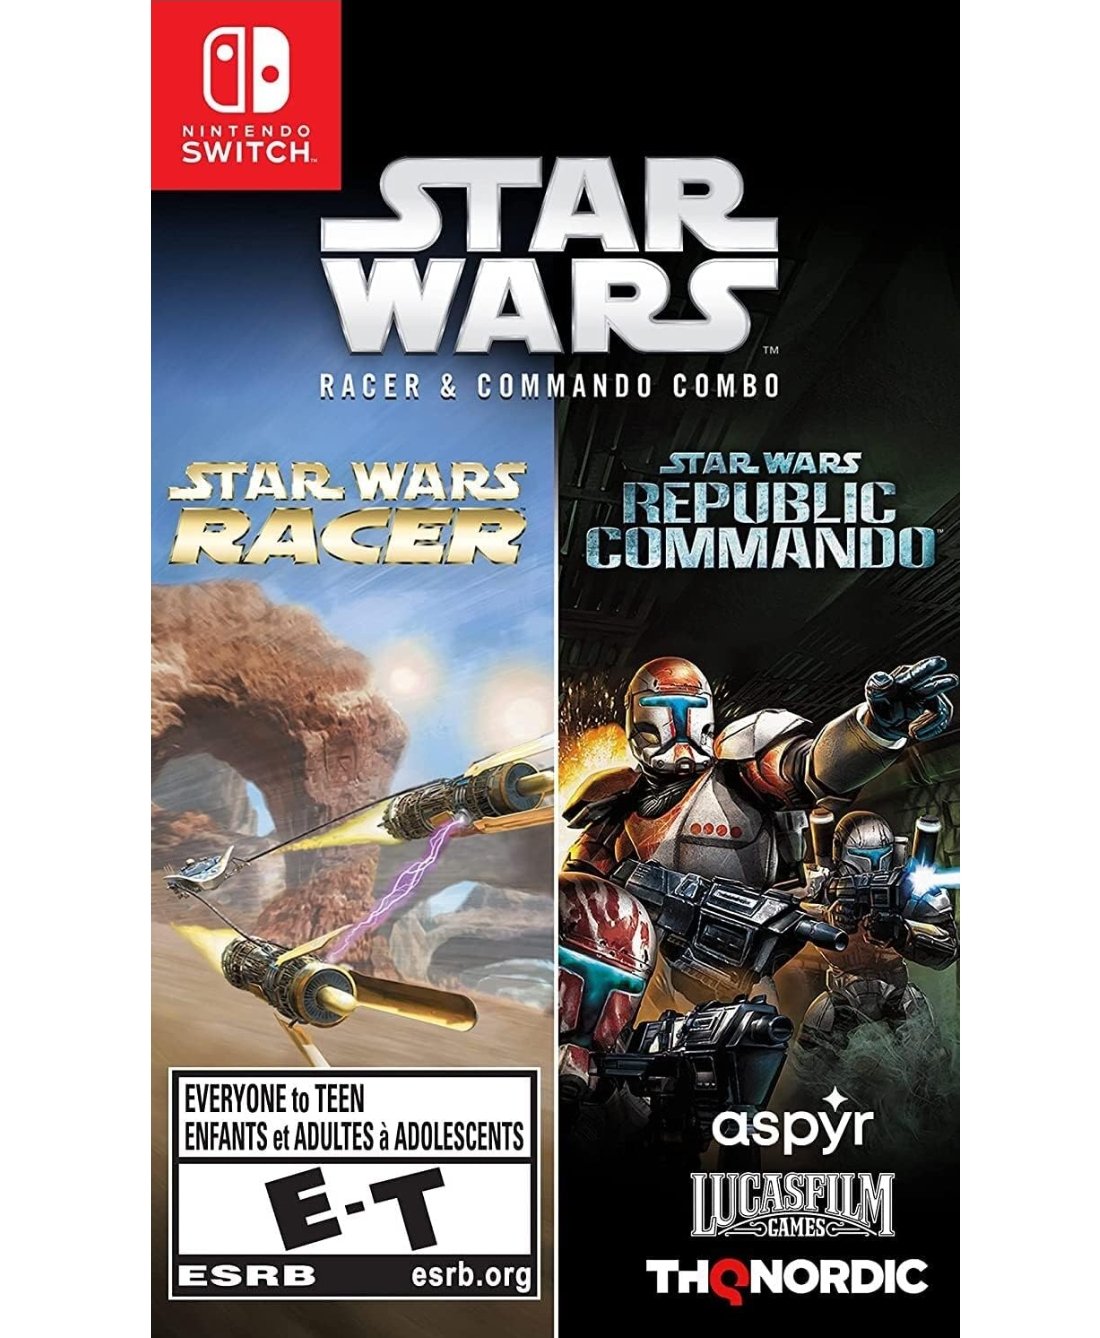 STAR WARS RACER & COMANDO COMBO SWITCH - EASY GAMES